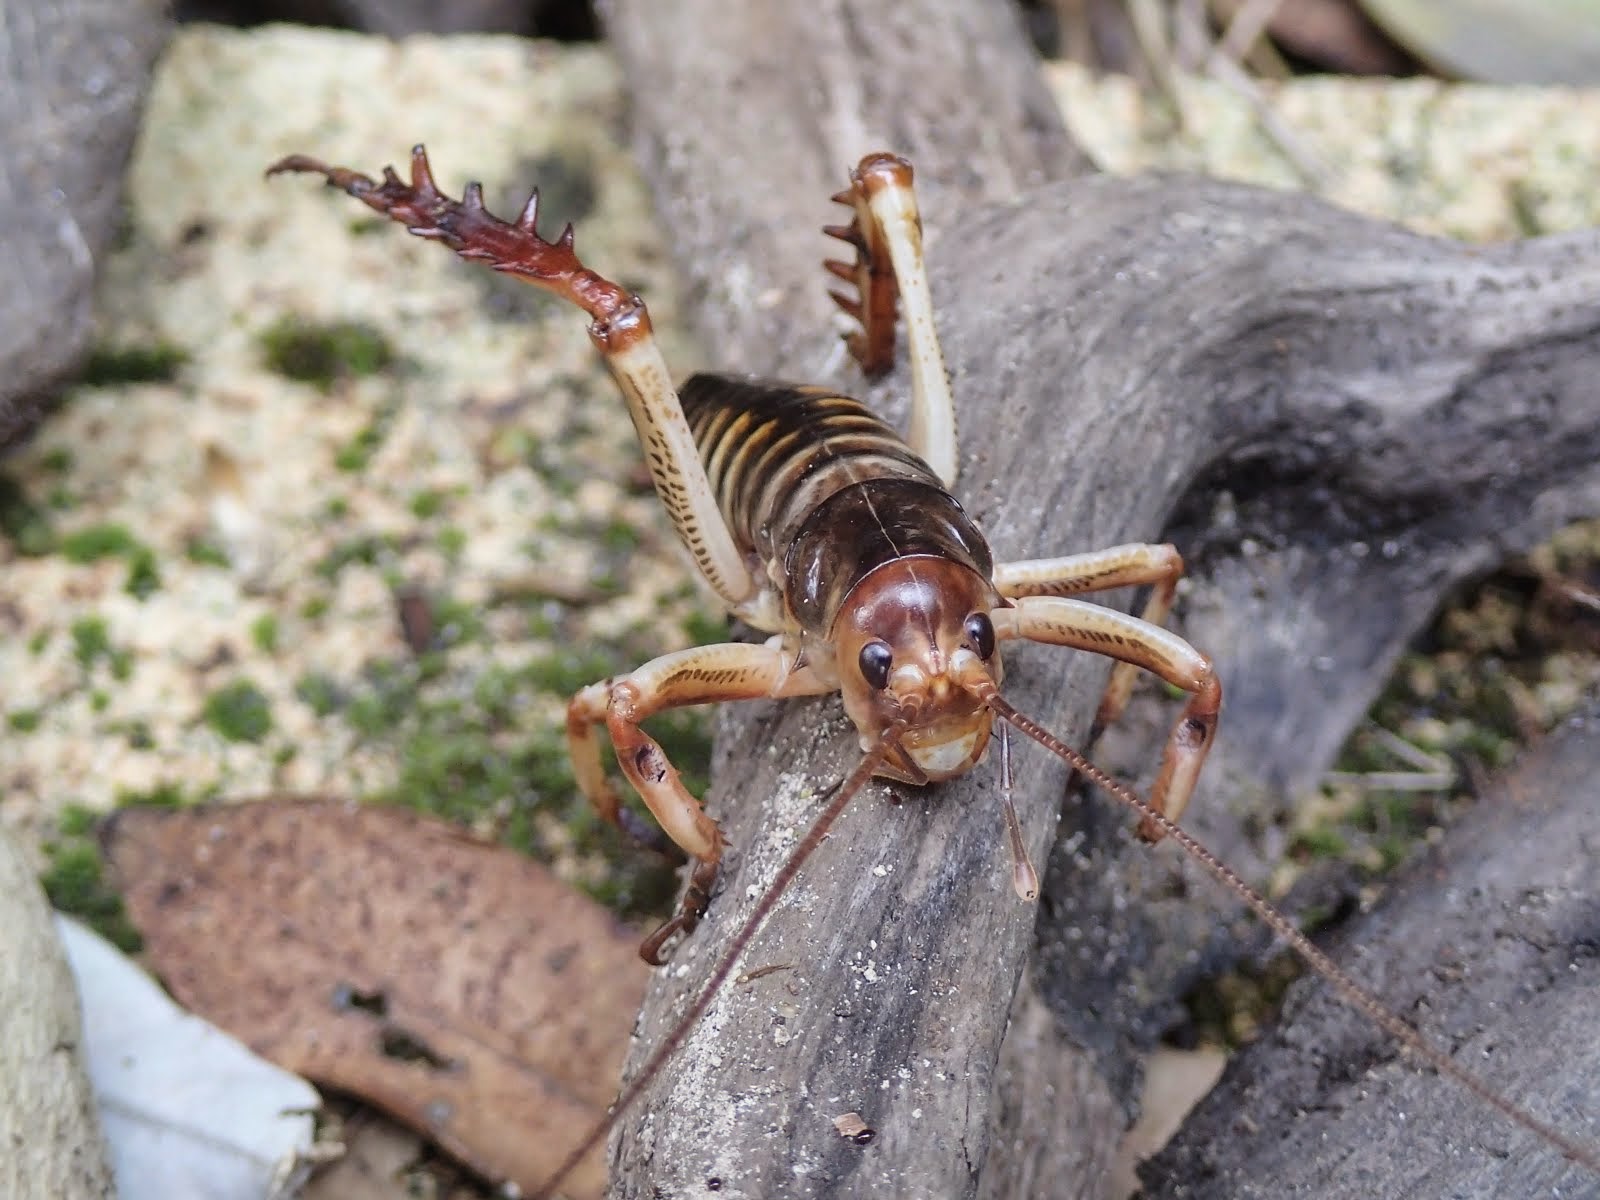 A surprised weta, minding its own business under a bit of driftwood until Carol comes along.